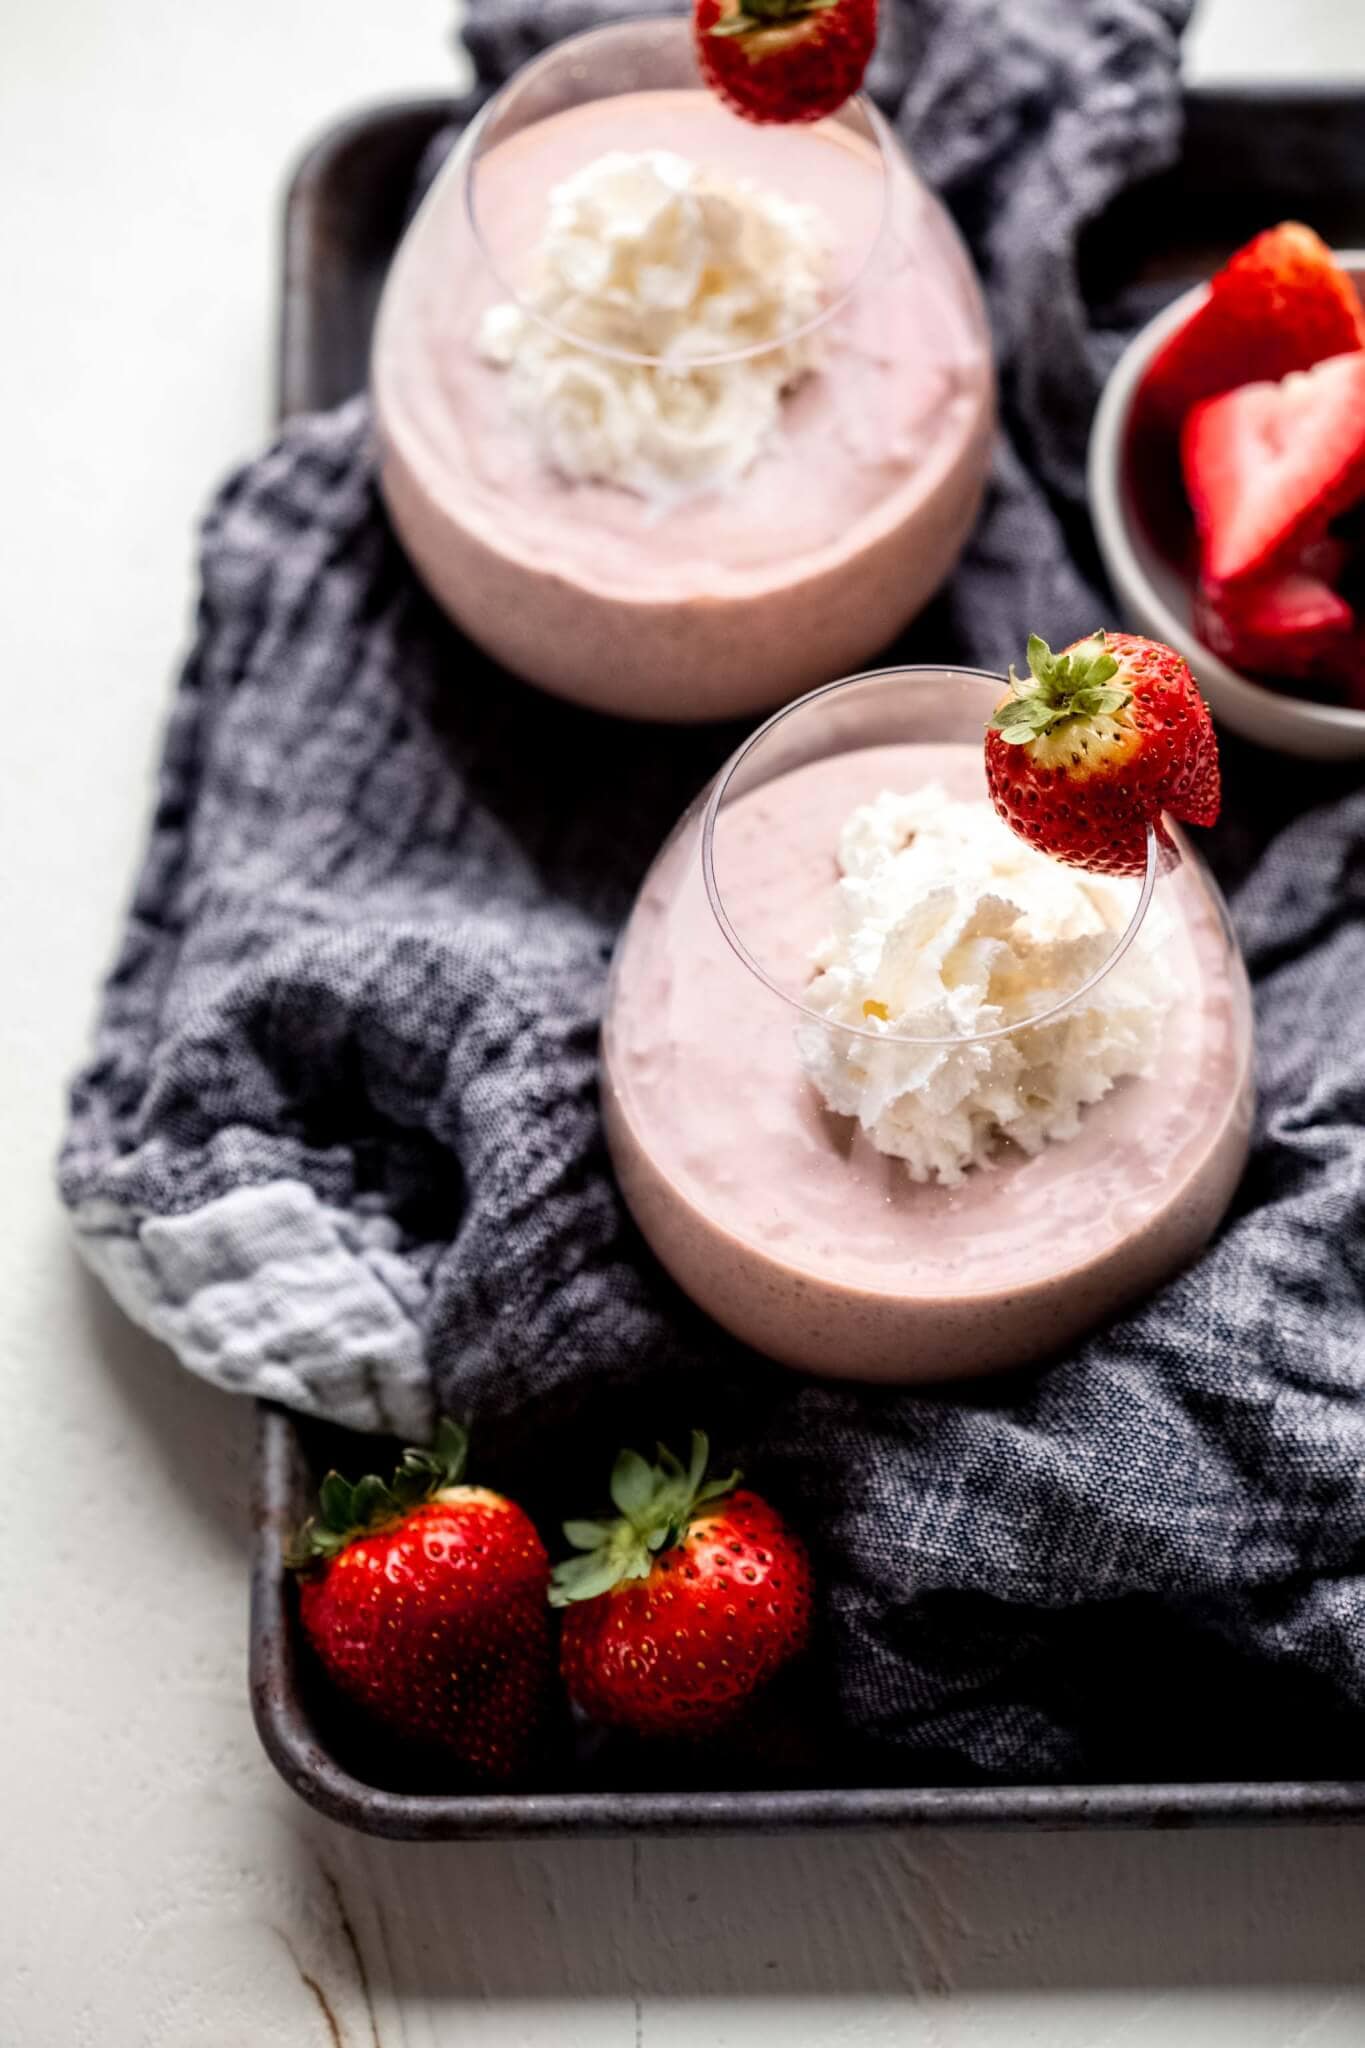 Side view of two healthy strawberry smoothies on tray with grey towel and strawberries scattered about.